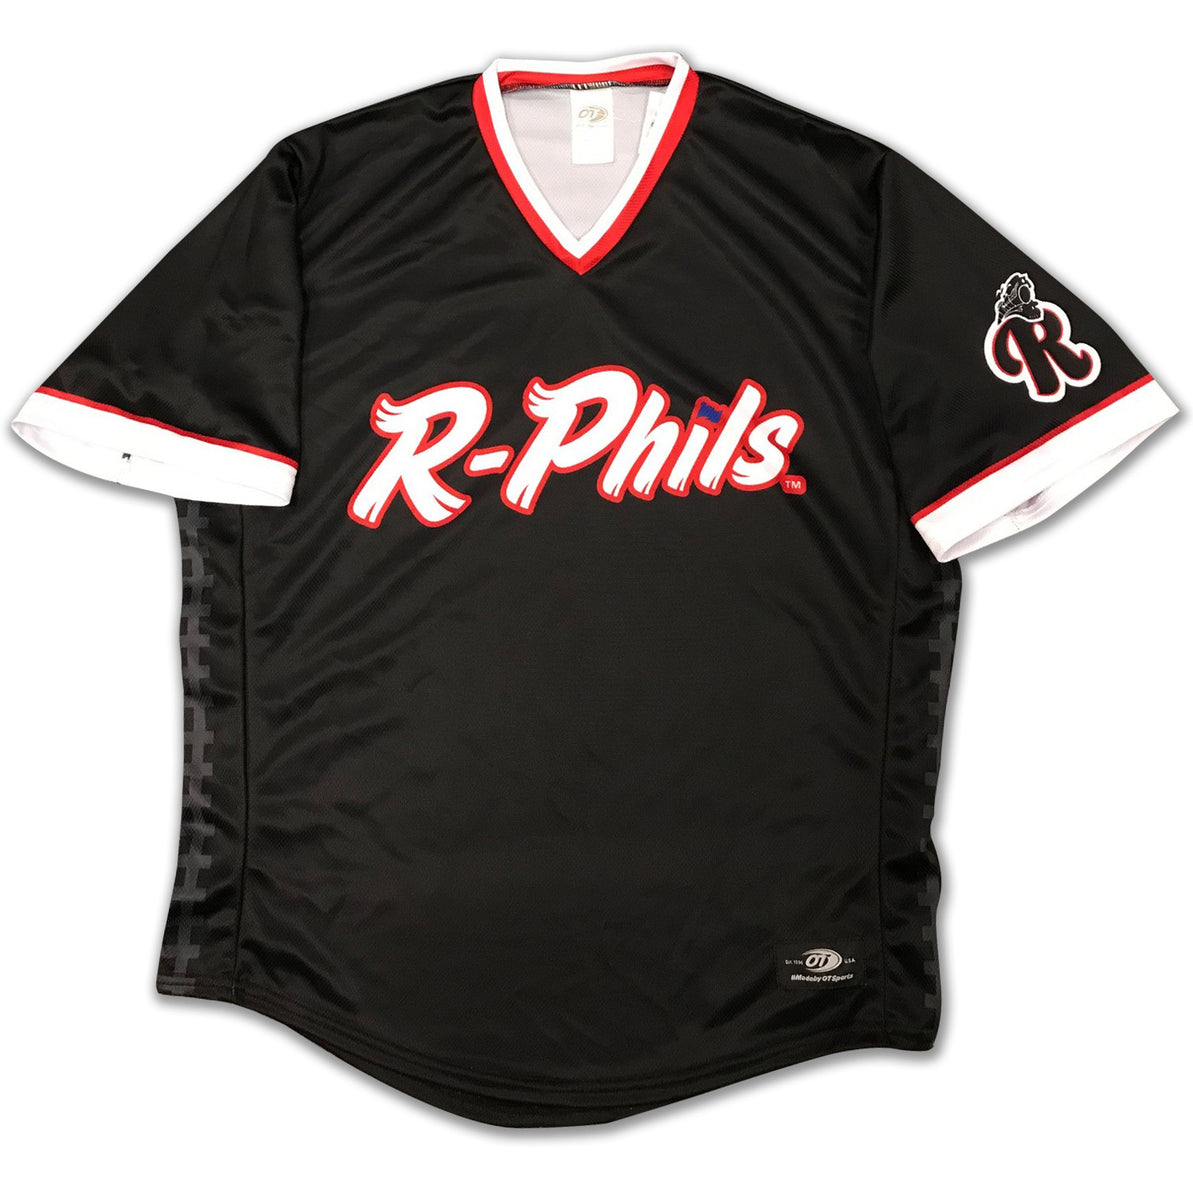 OT Sports Reading Fightin Phils Adult Navy Home Jersey XS